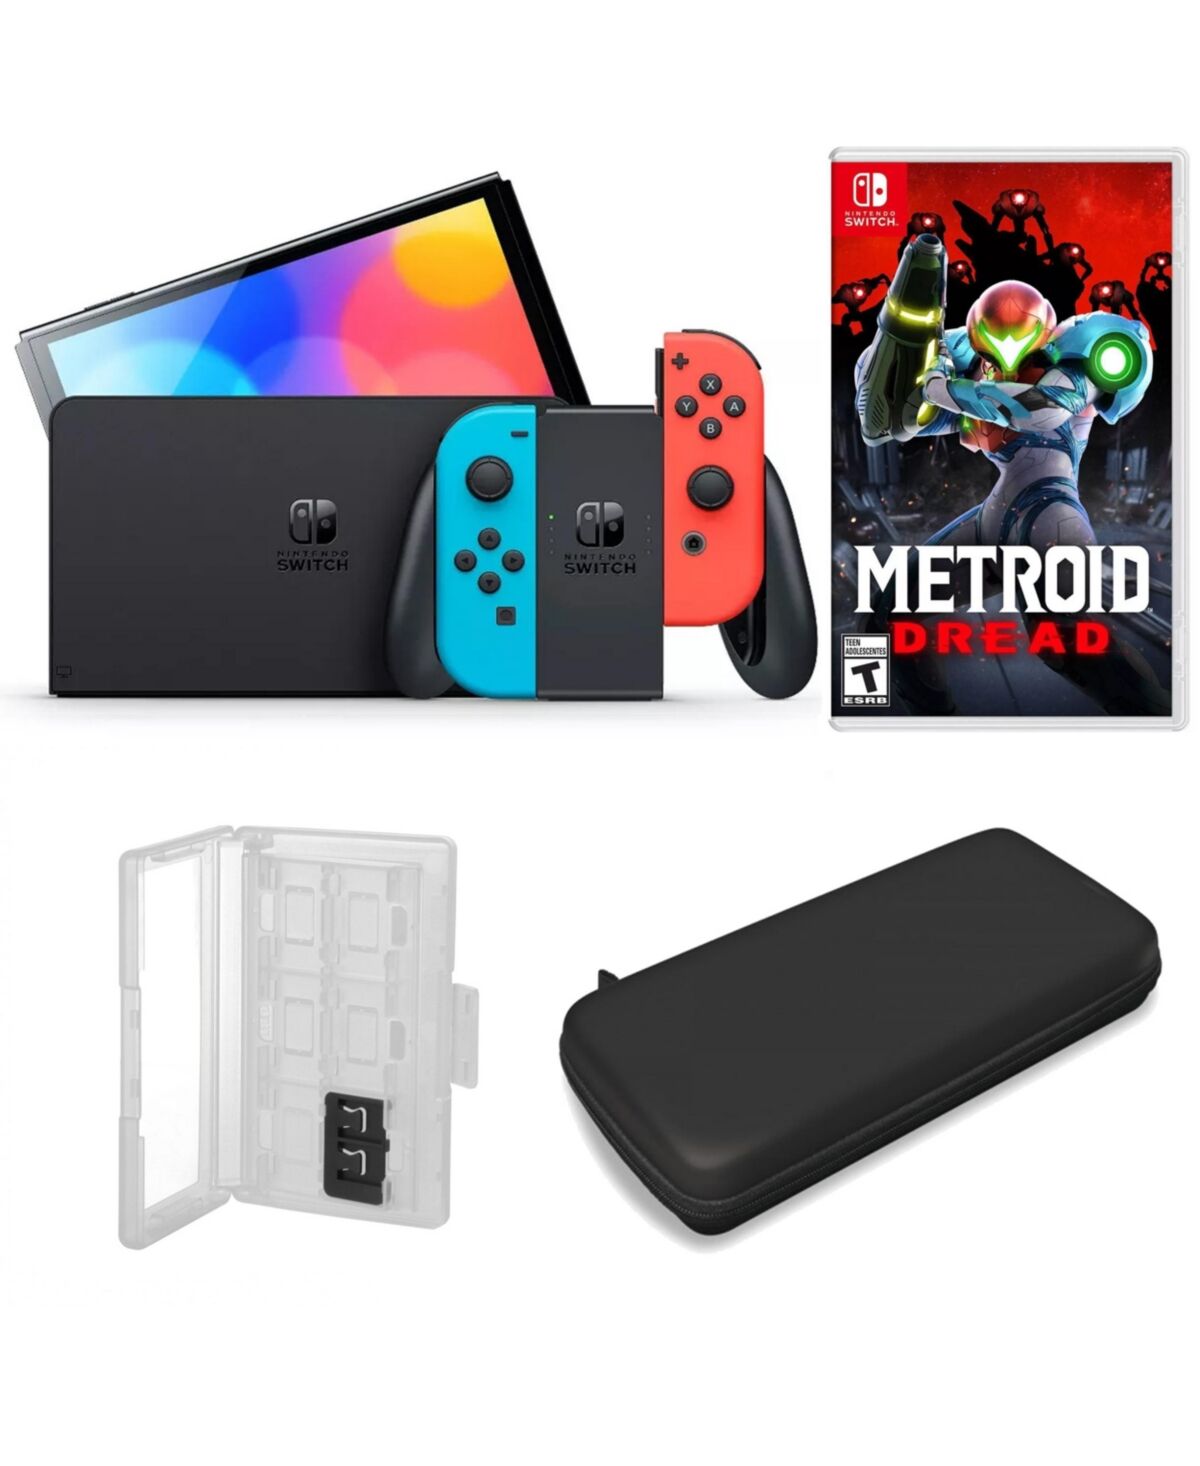 Nintendo Switch Oled in Neon with Metroid Dread & Accessories - Open Miscellaneous